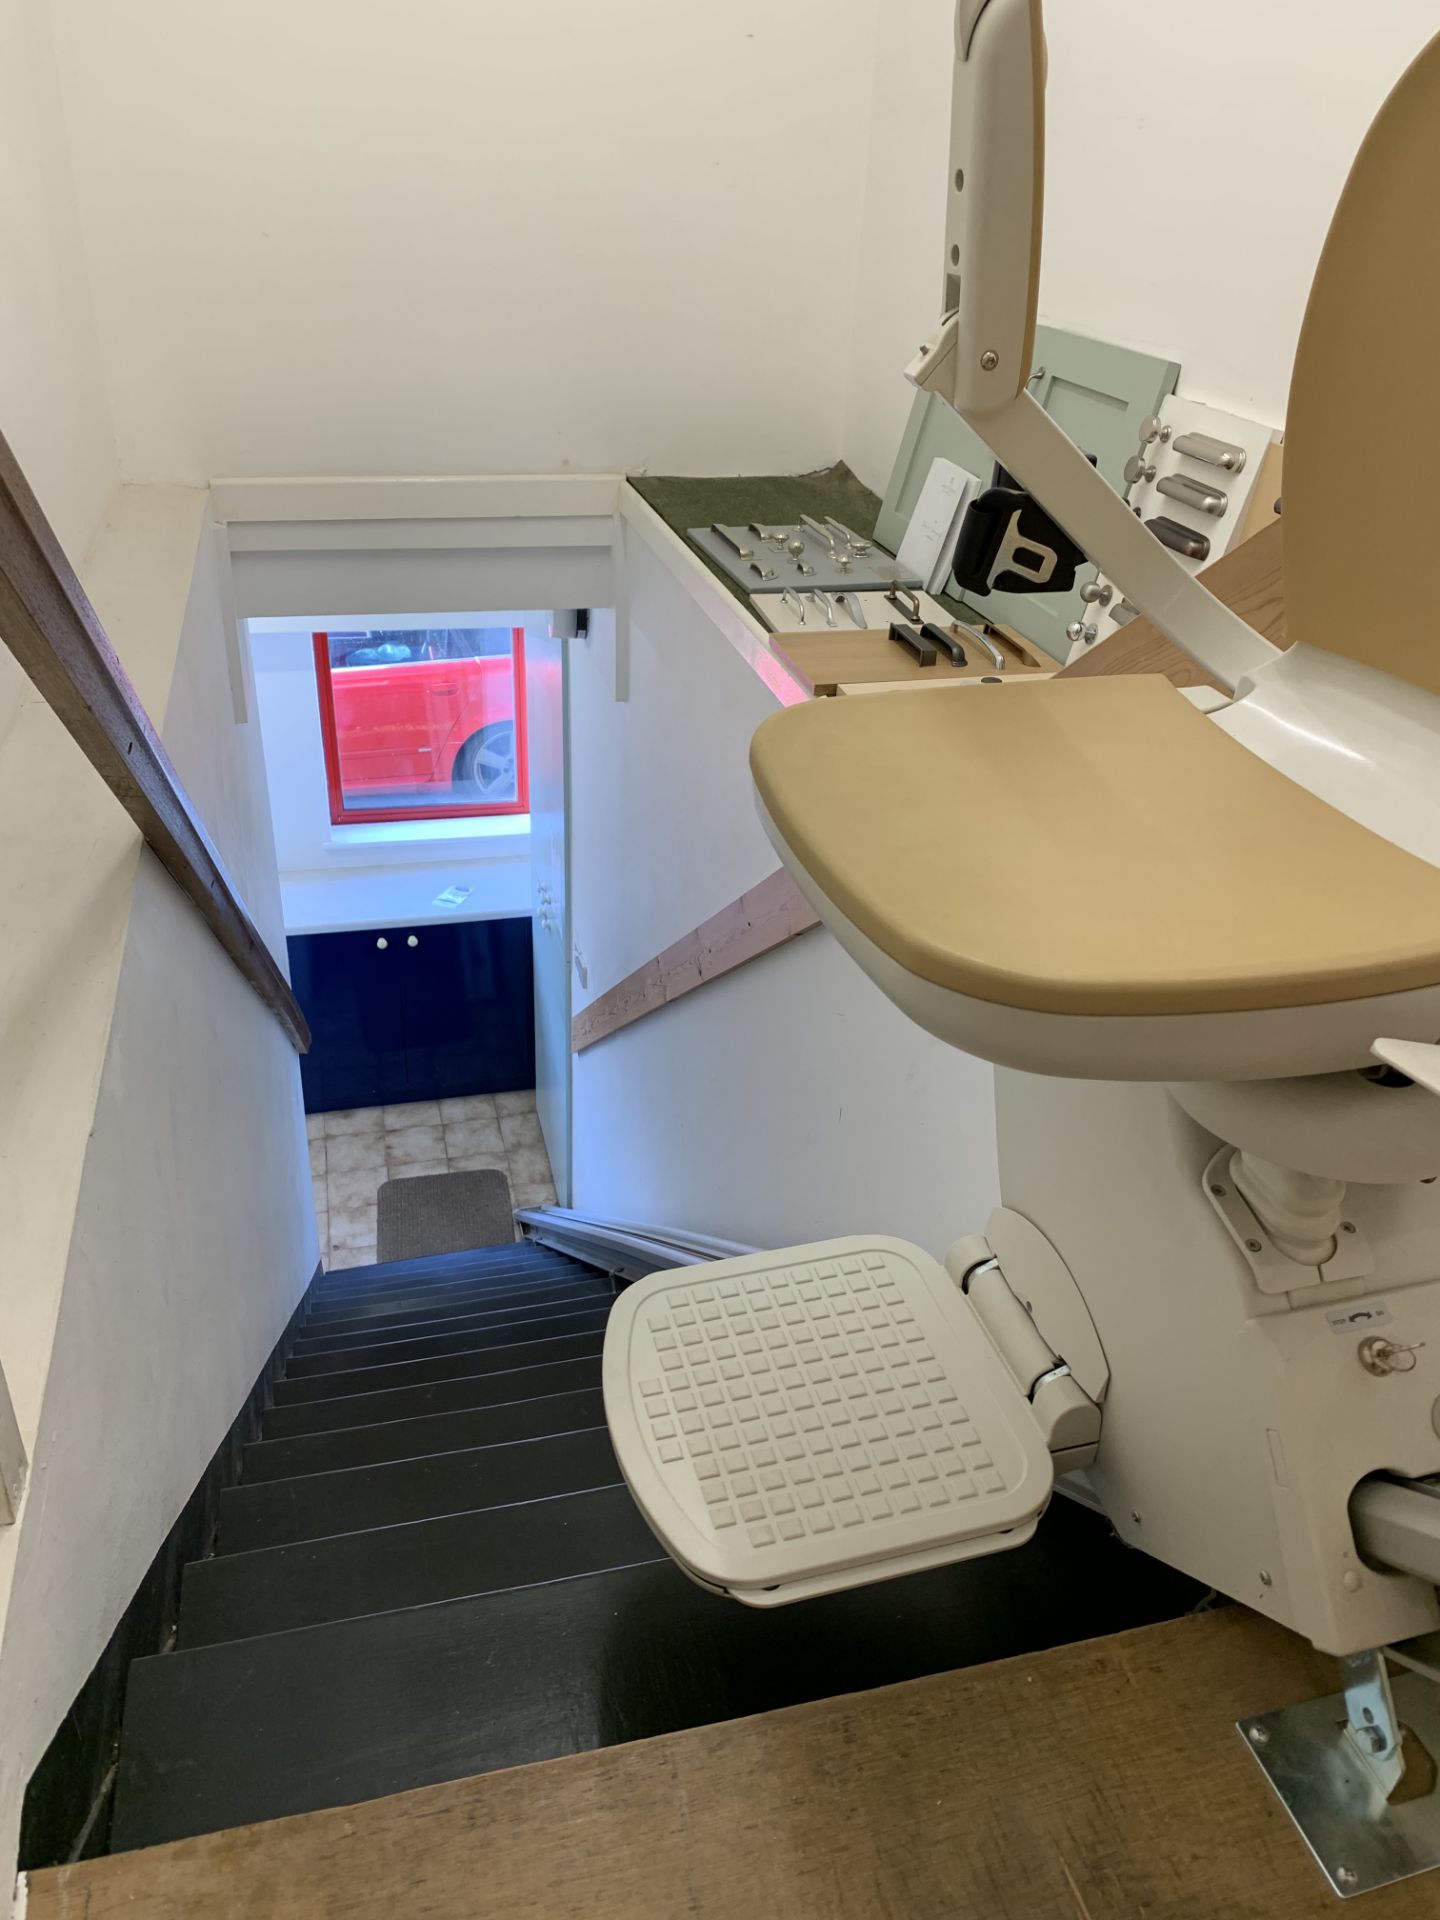 (2017) ACORN Superglide 130 T700 Stairlift - Image 3 of 5